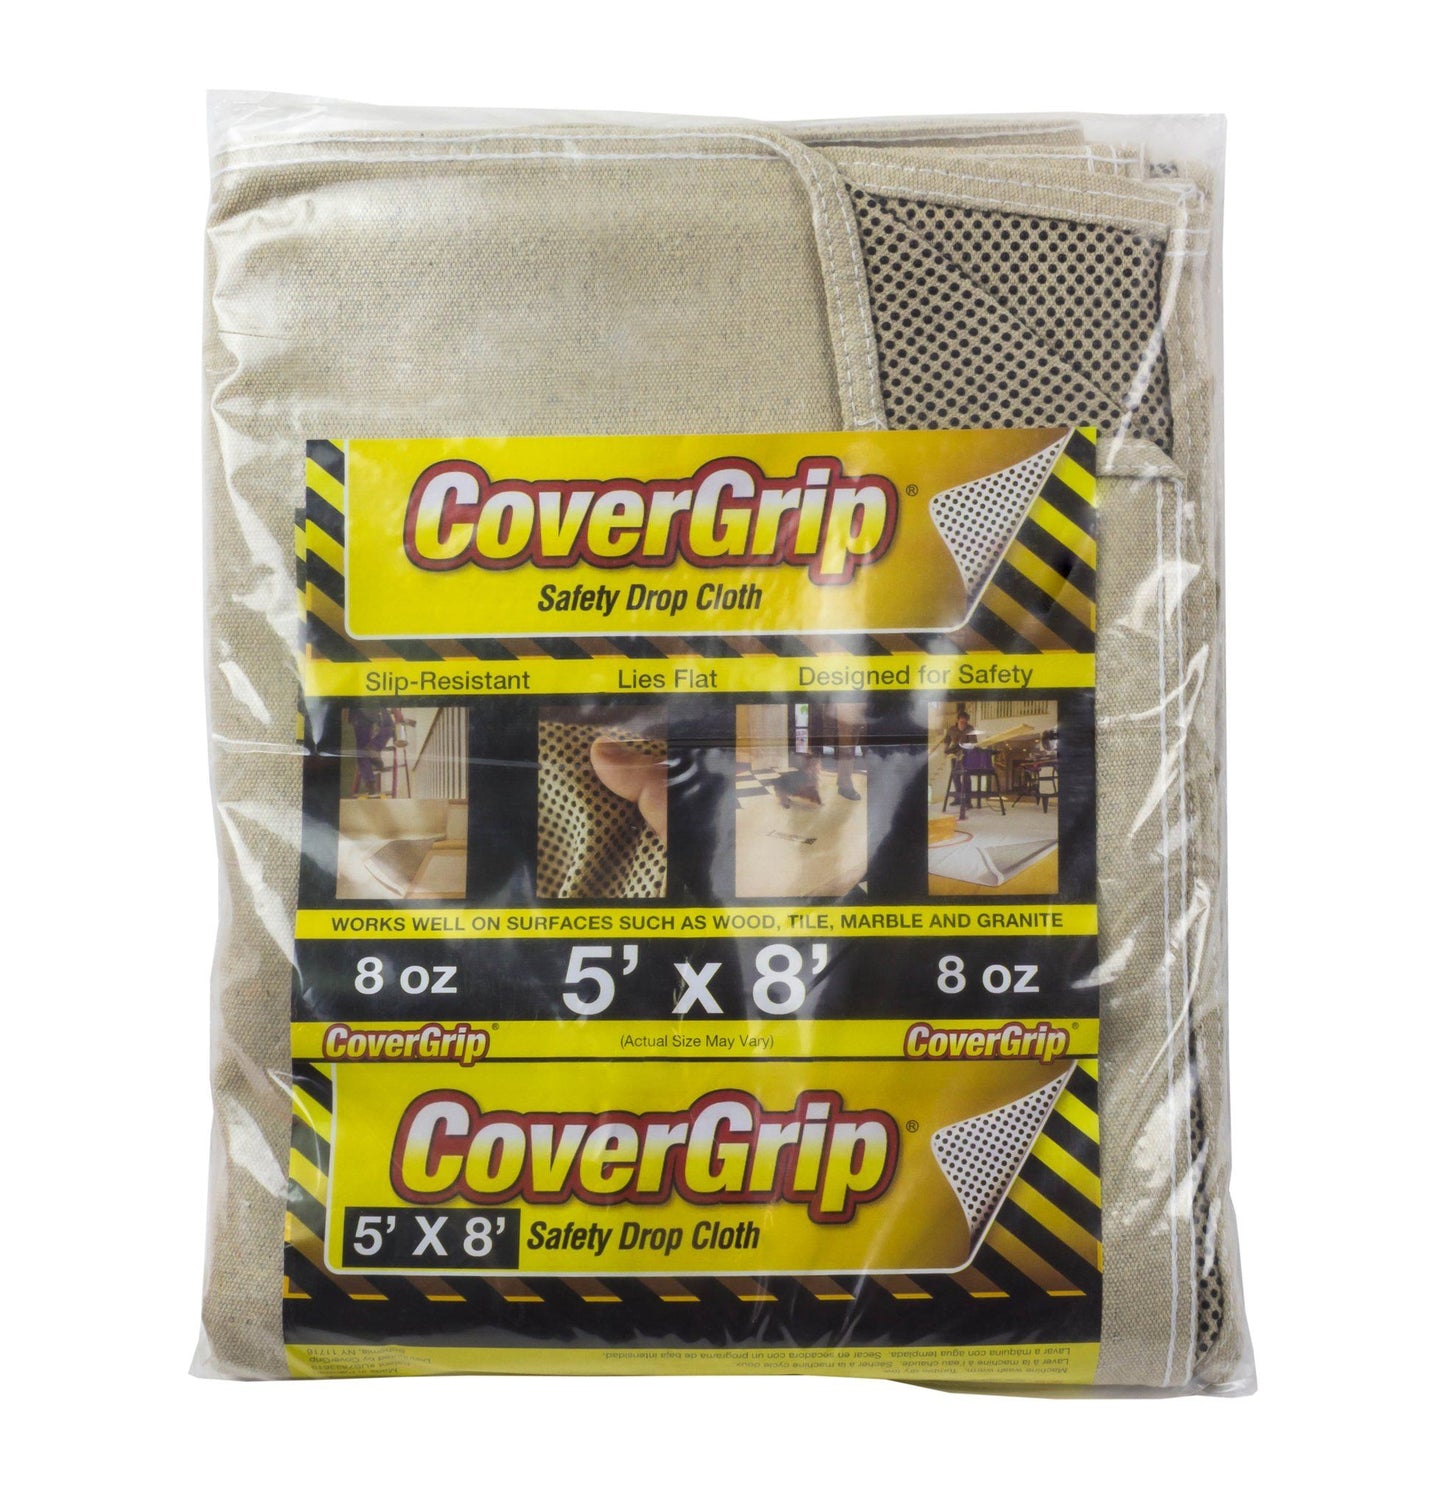 Covergrip 5' x 8' Safety Drop Cloth